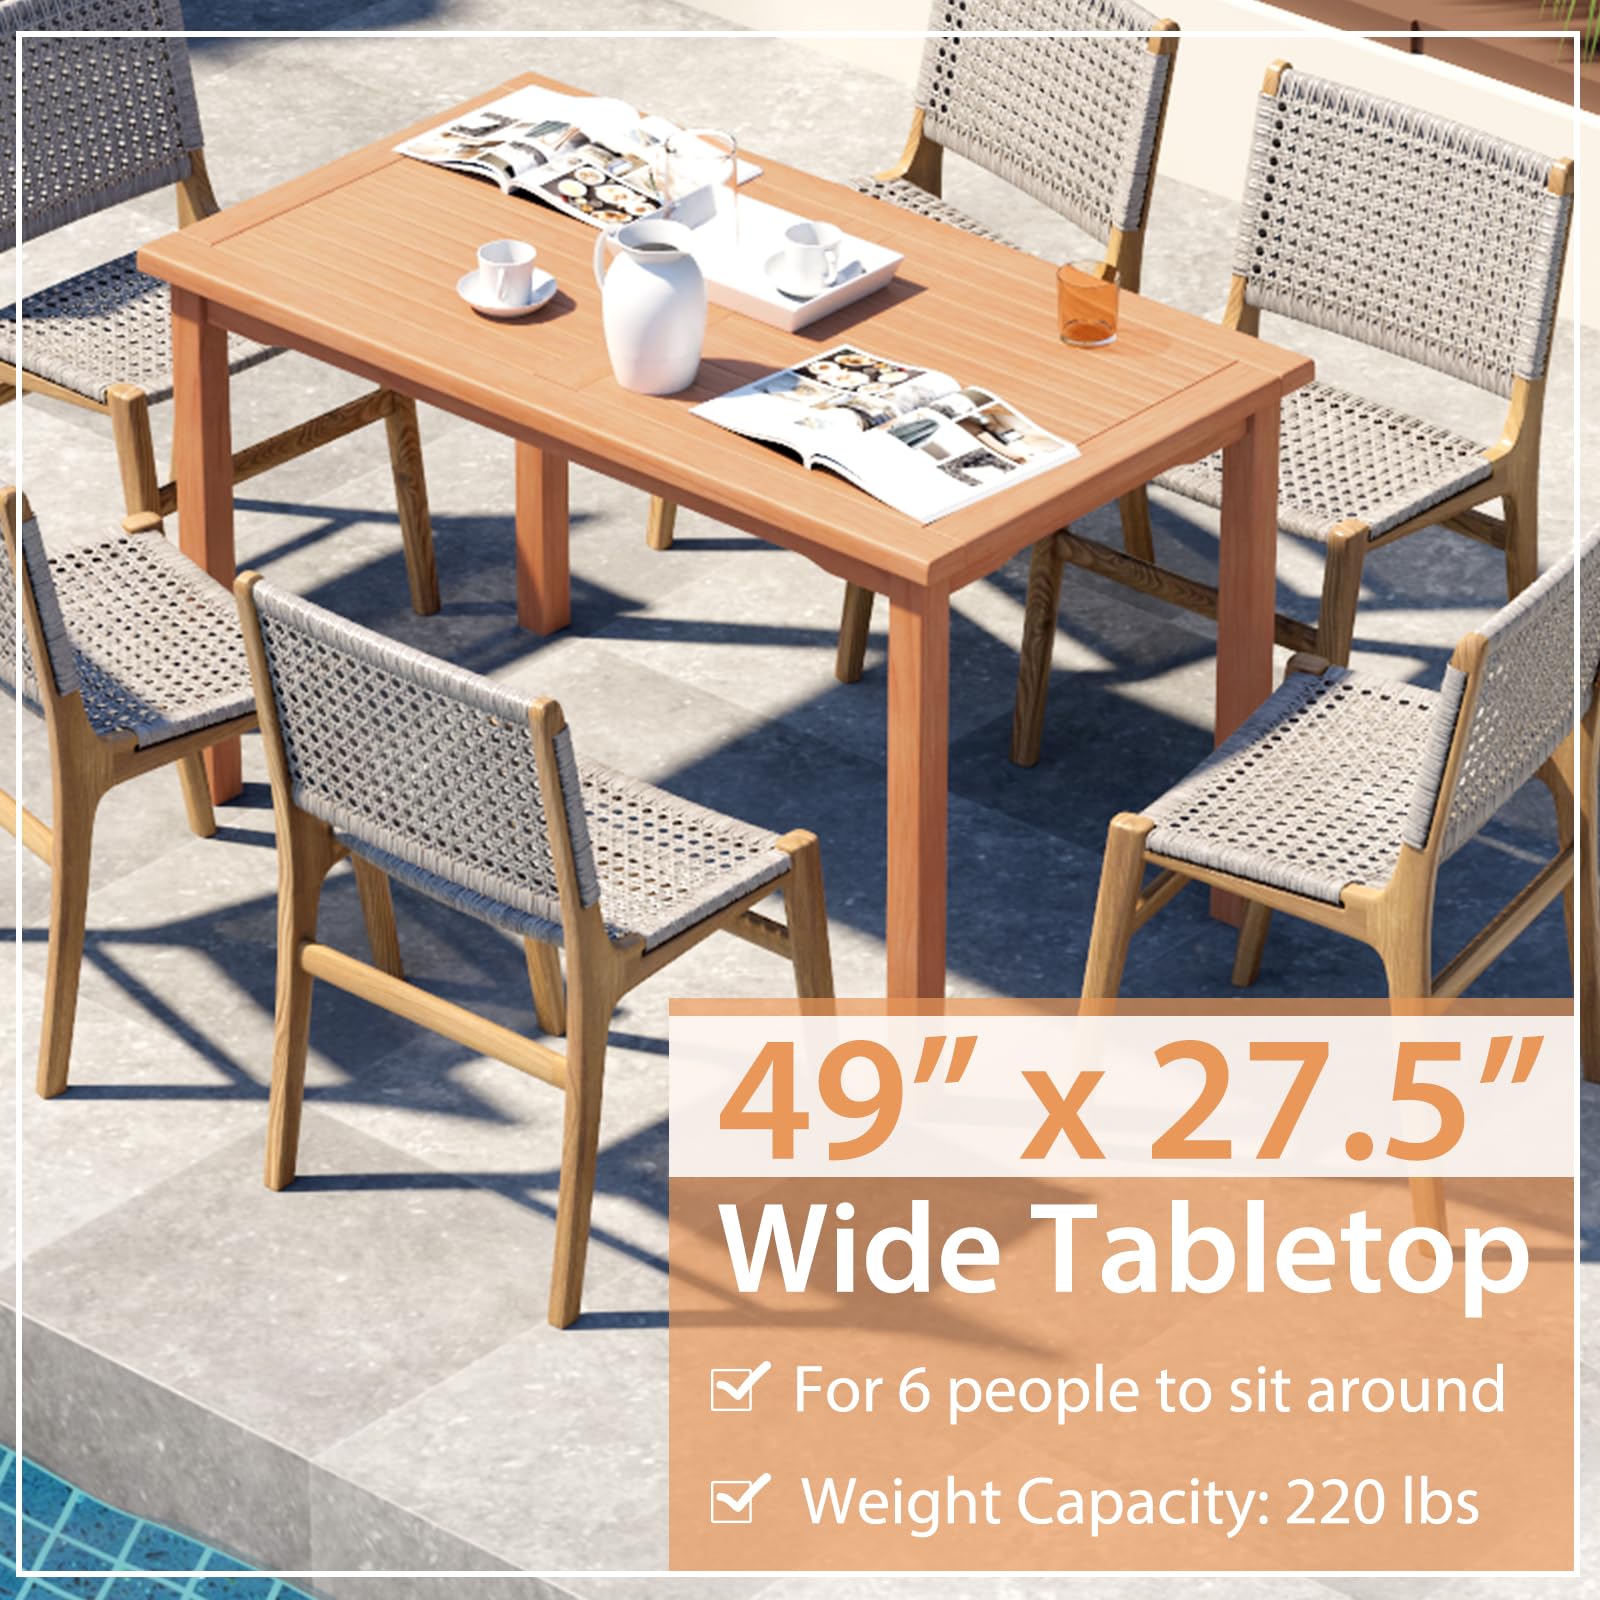 Giantex Patio Rectangle Dining Table, 49” x 27.5” Teak Wood Outdoor Table with Spacious Slatted Tabletop for 6 Person